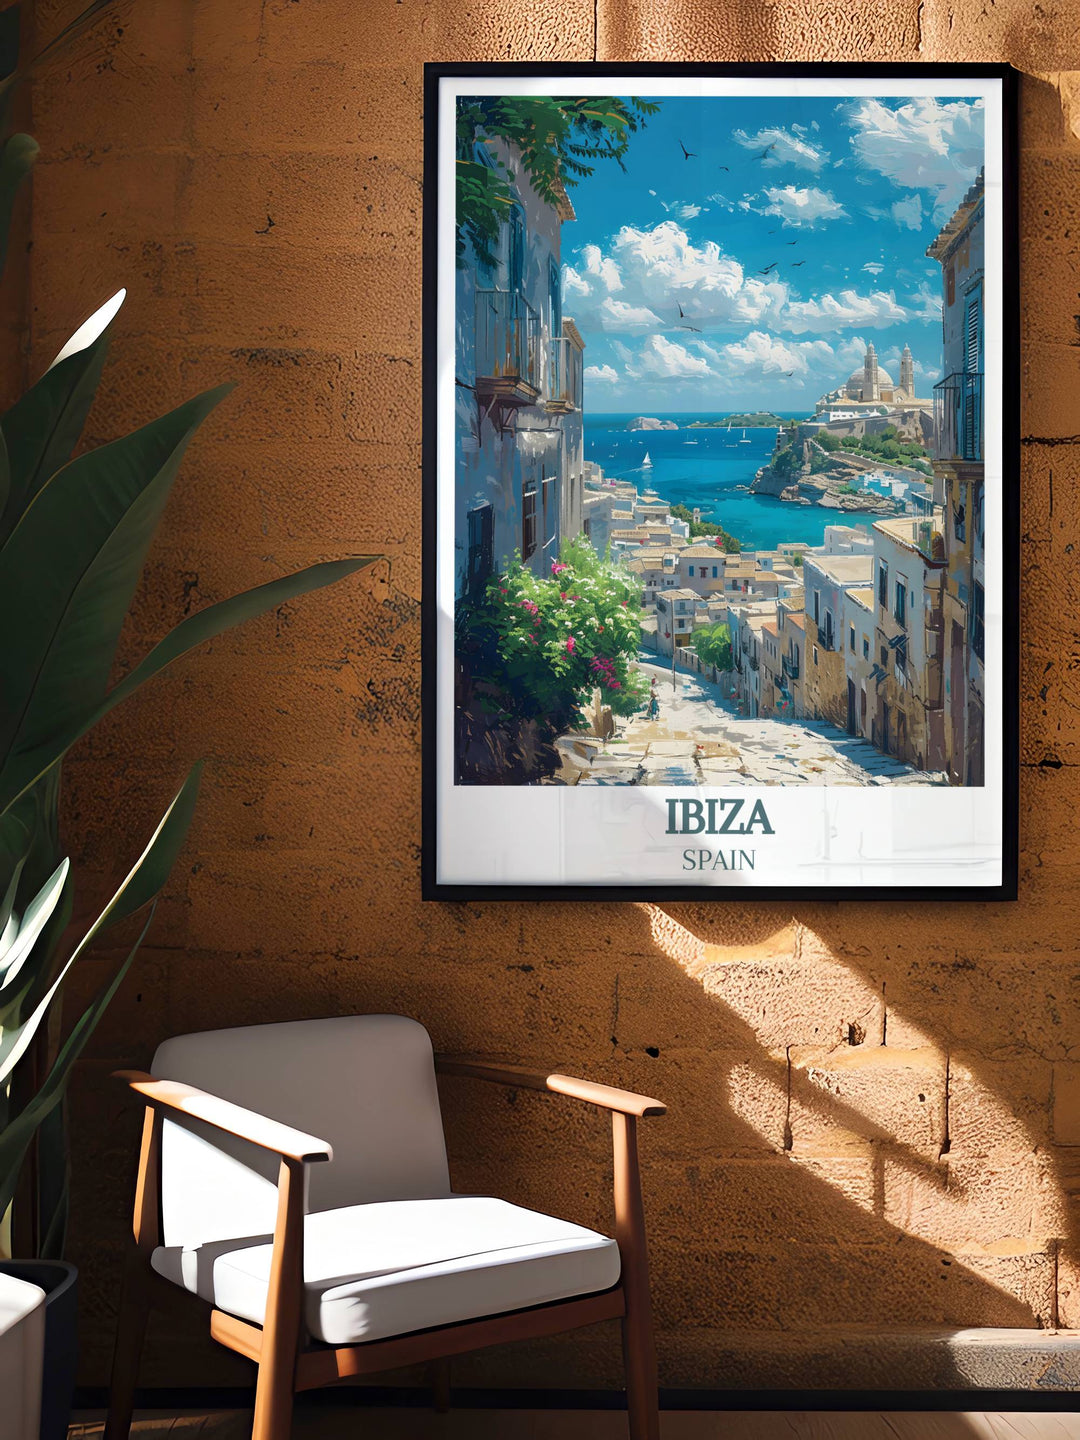 Dance Music Art poster showcasing the dynamic O Beach Day Club and the historical Dalt Vila Ibiza Old Town perfect for adding a touch of Ibizas lively nightlife and rich history to your wall art collection